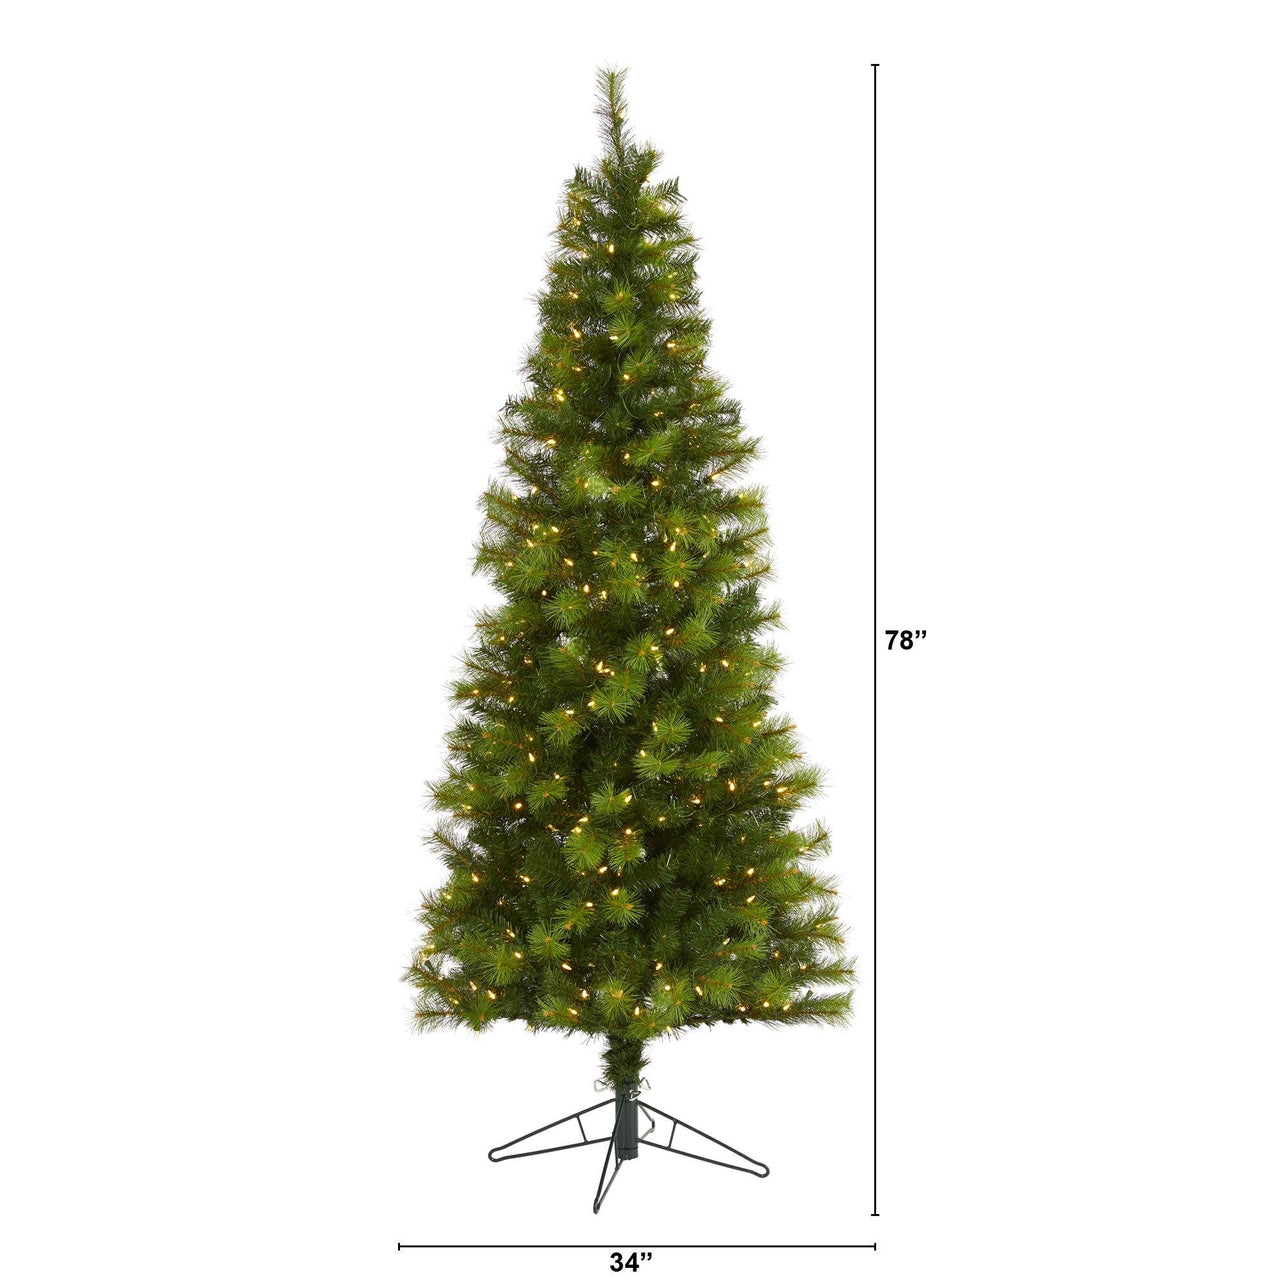 6.5’ Green Valley Pine Artificial Christmas Tree with 300 Warm White LED Lights and 579 Bendable Branches - The Fox Decor